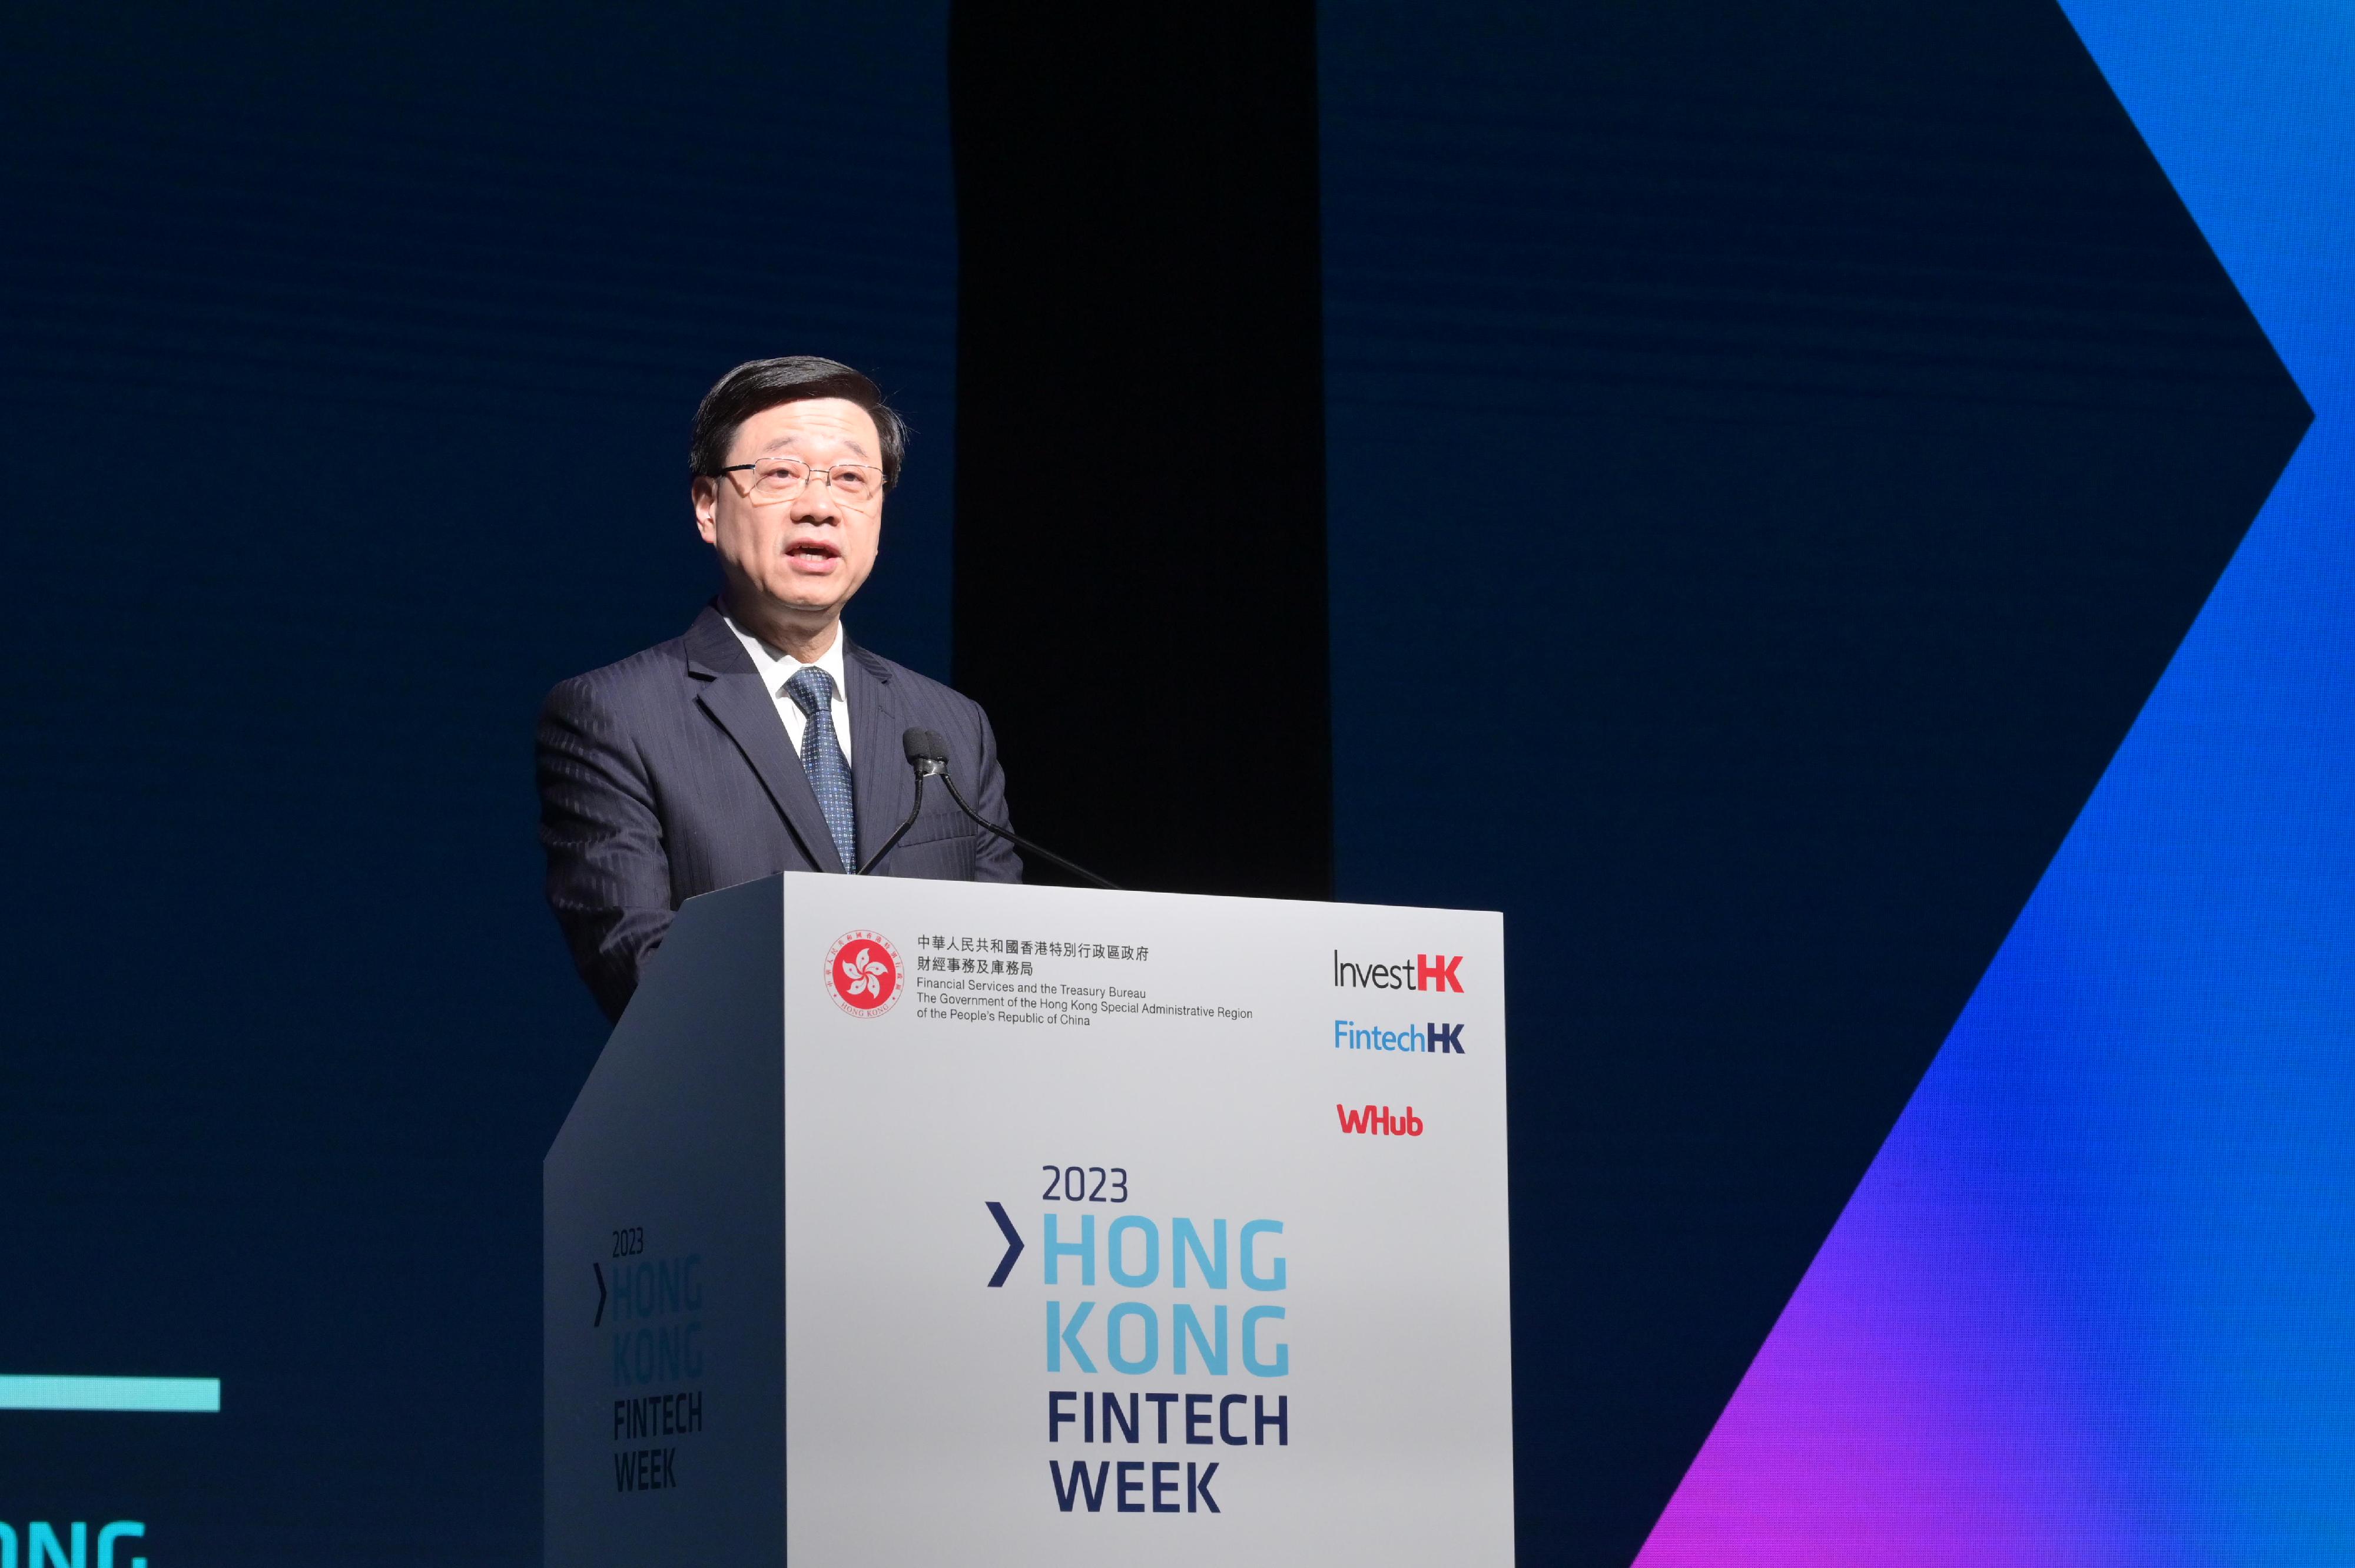 Hong Kong FinTech Week 2023 redefines fintech as digitalising finance and transforming real economy